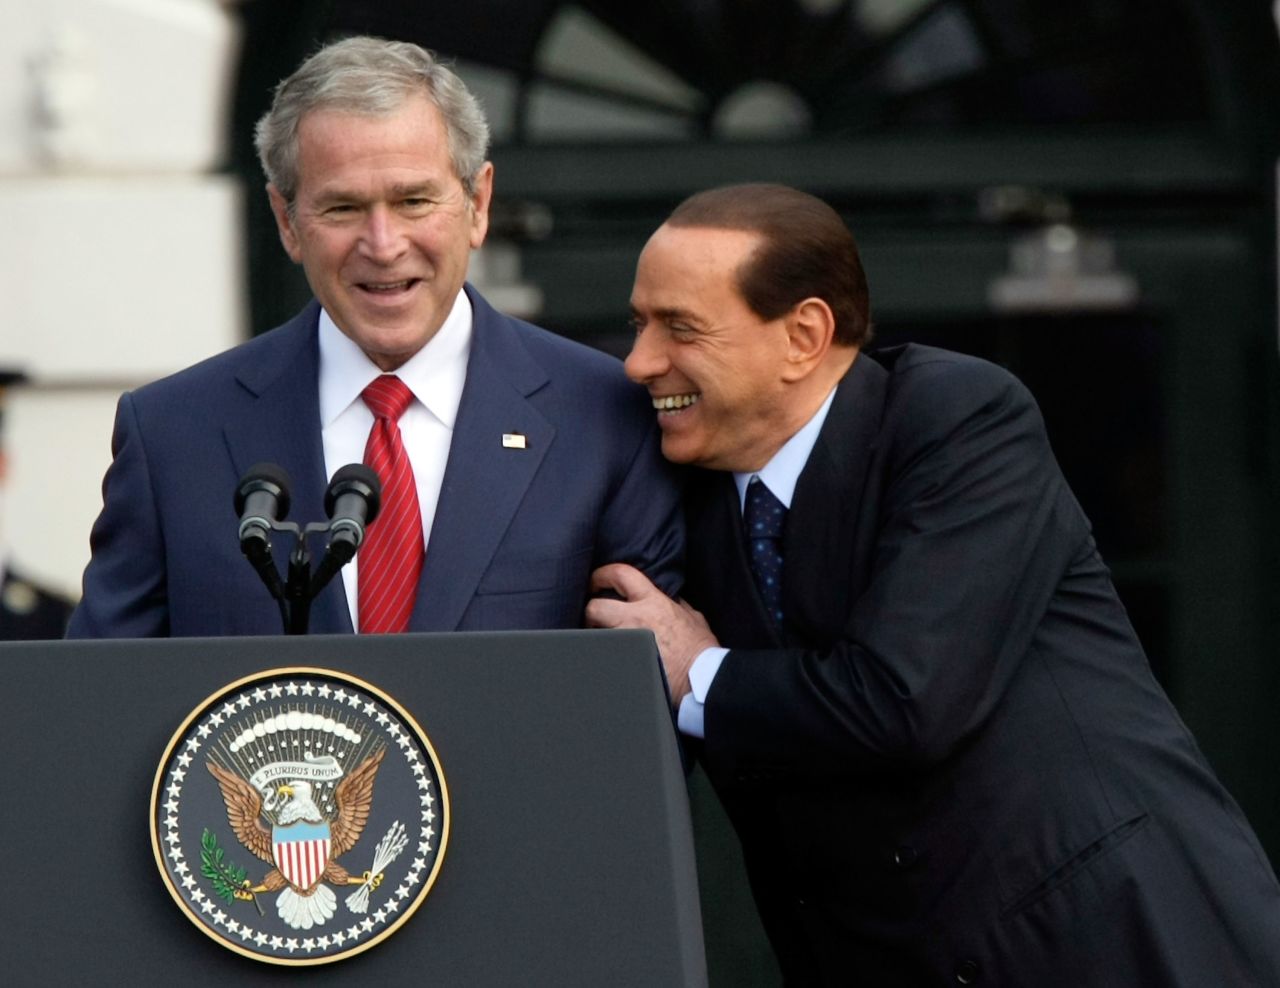 Berlusconi shares a moment with President George W. Bush during an arrival ceremony on the White House South Lawn in October 2008.